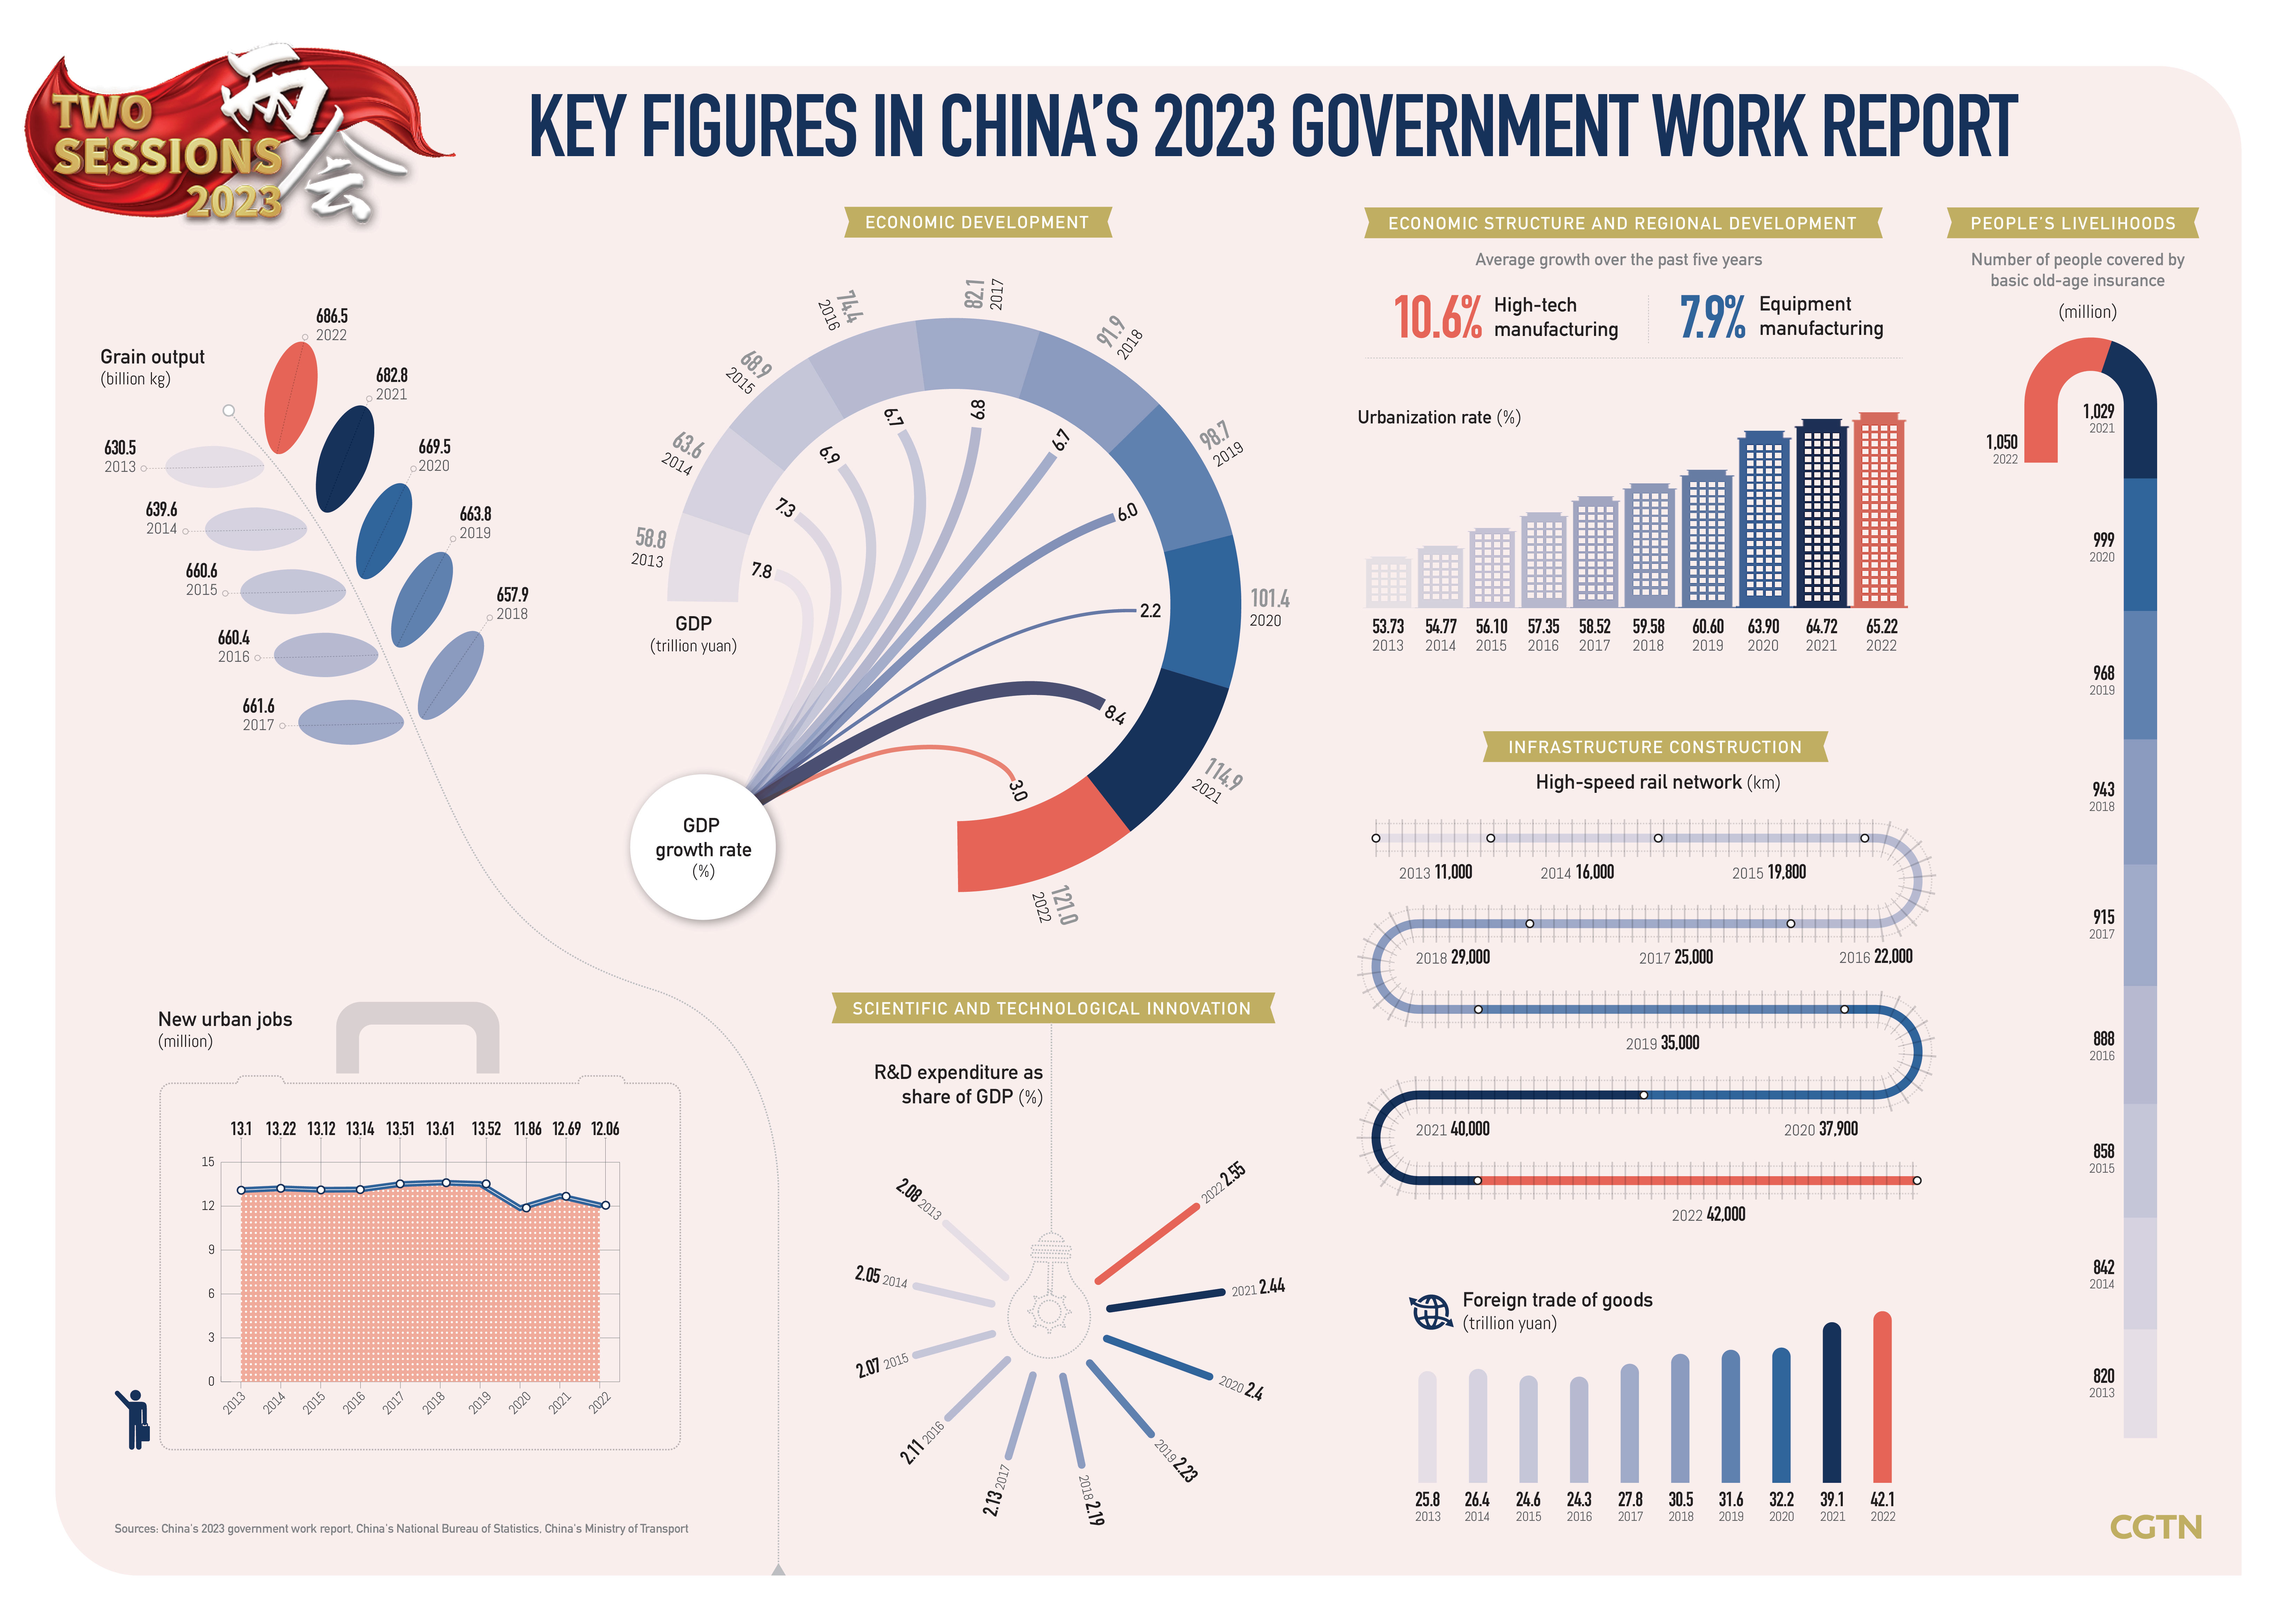 Graphics: Key figures in China's 2023 government work report